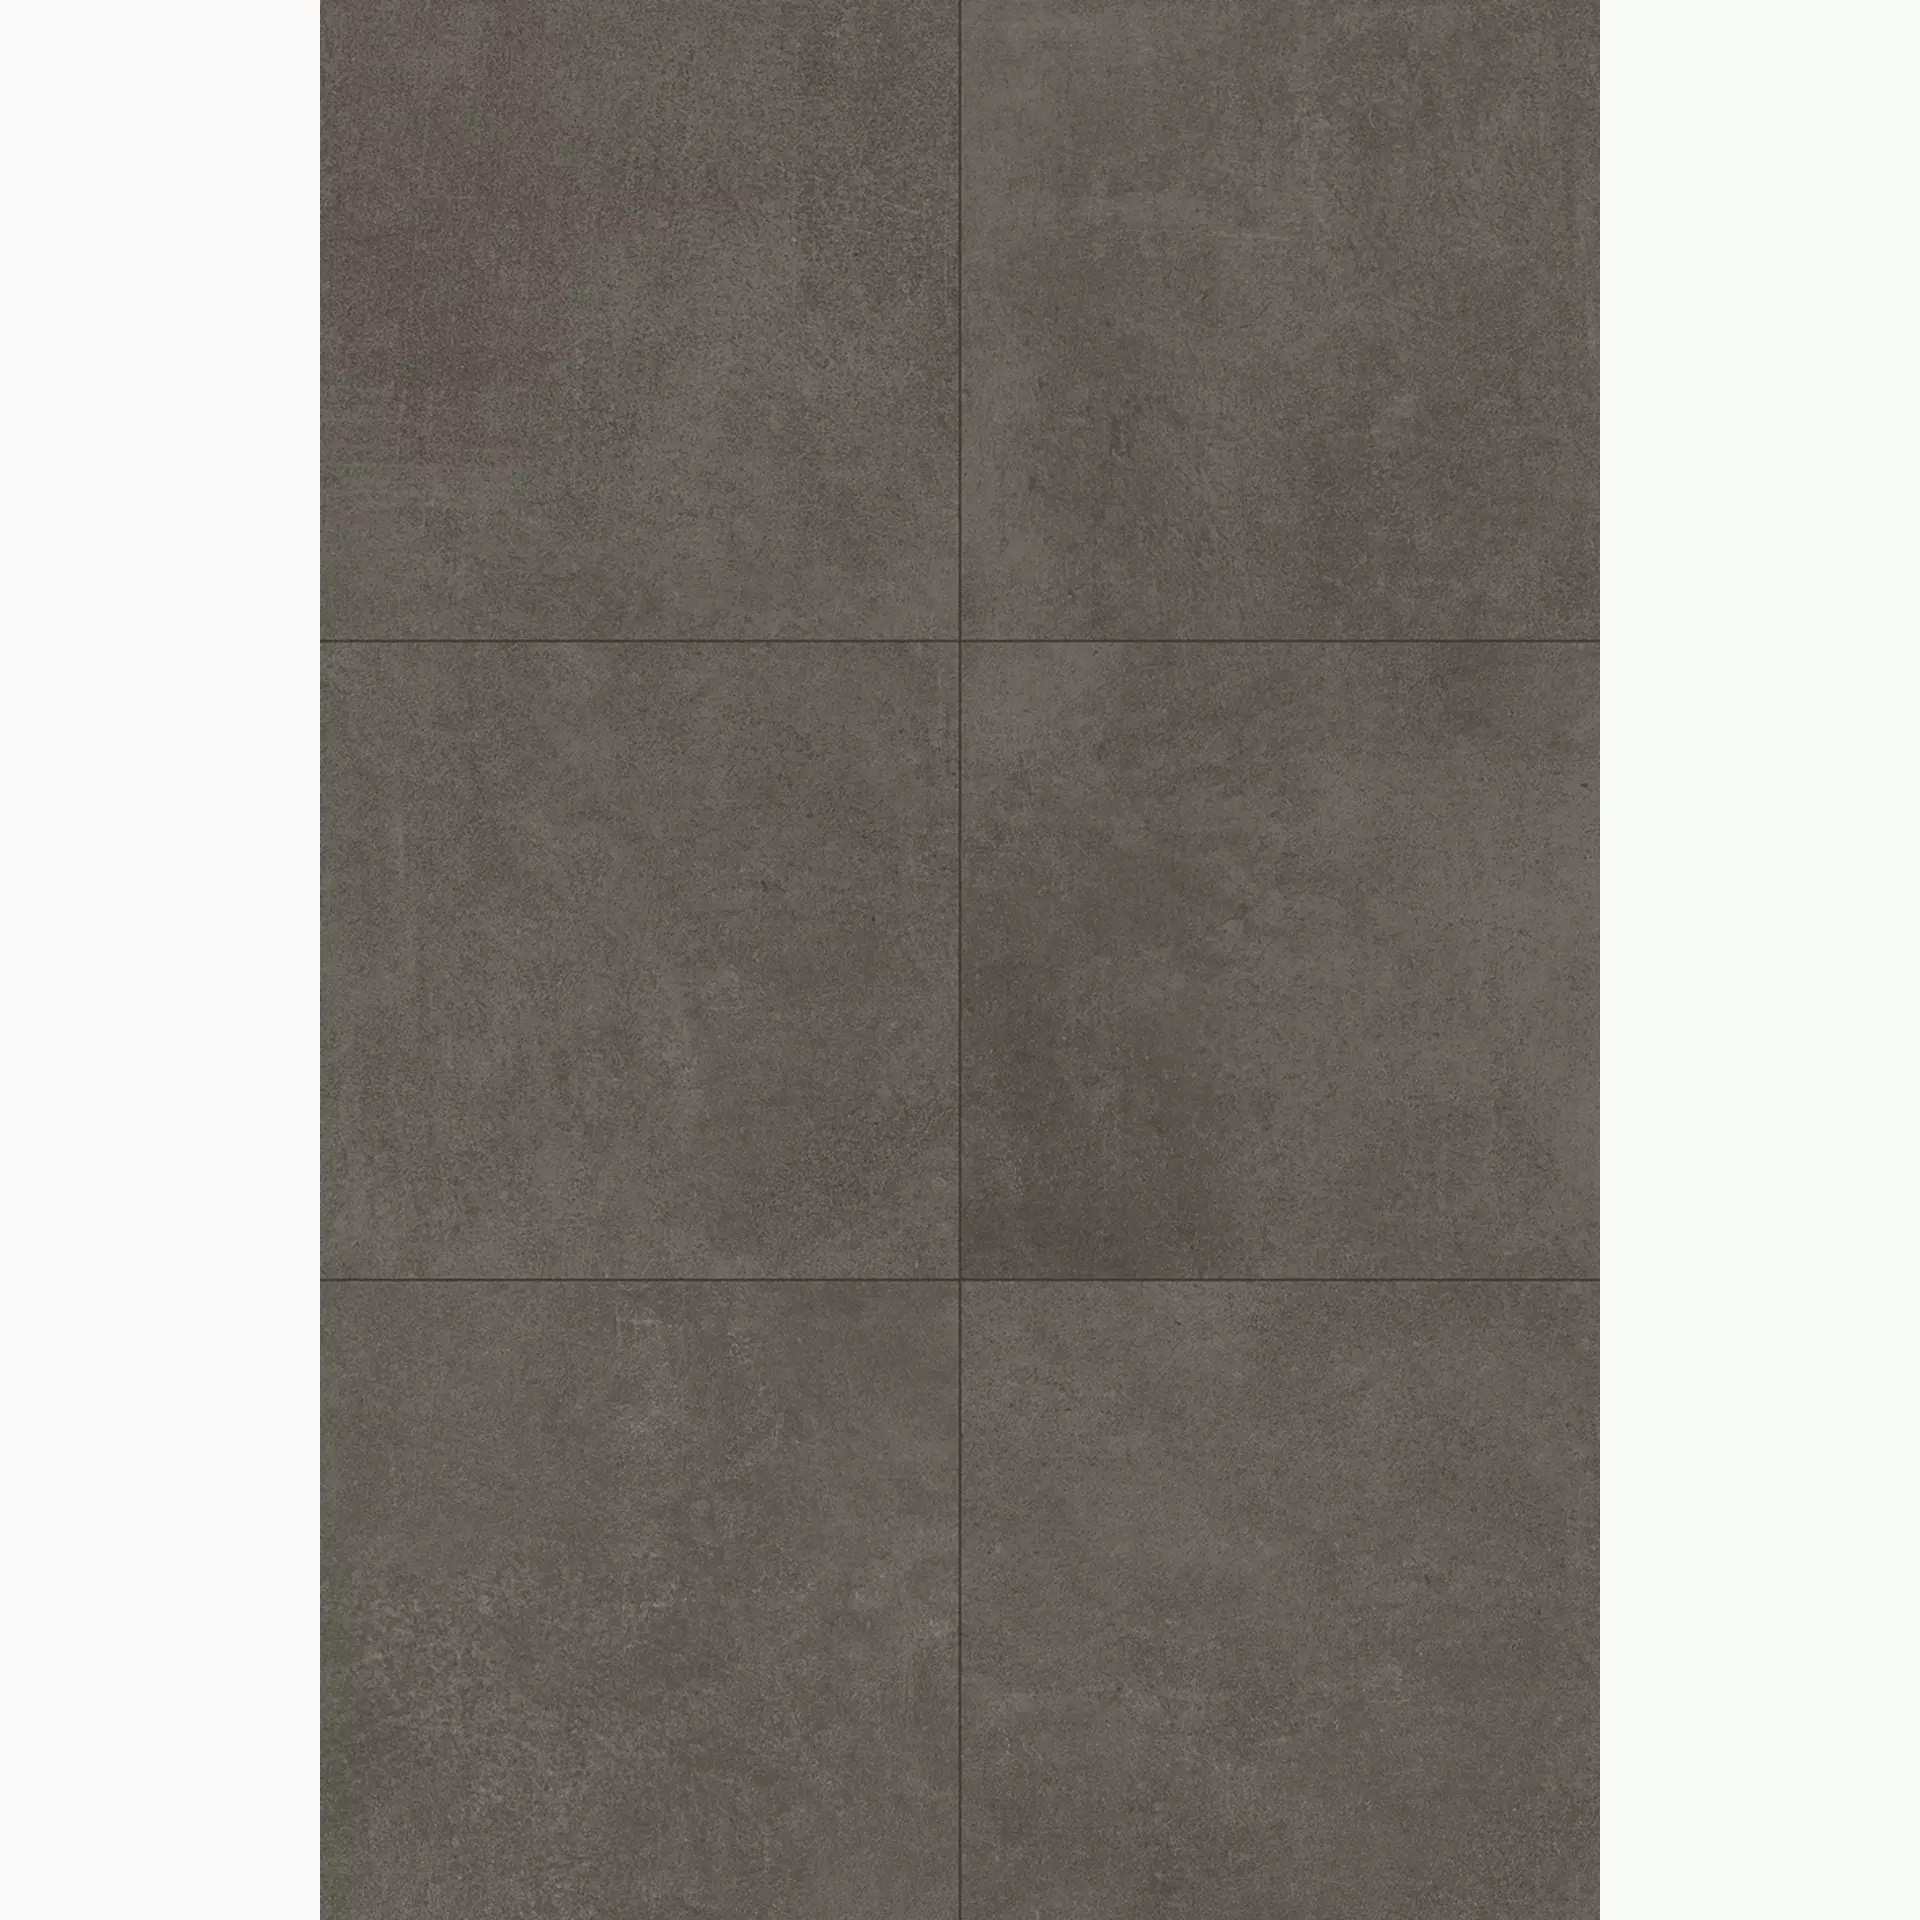 Mirage Glocal Gc 09 Toffee Naturale Mattoncino TO46 30x30cm 9mm